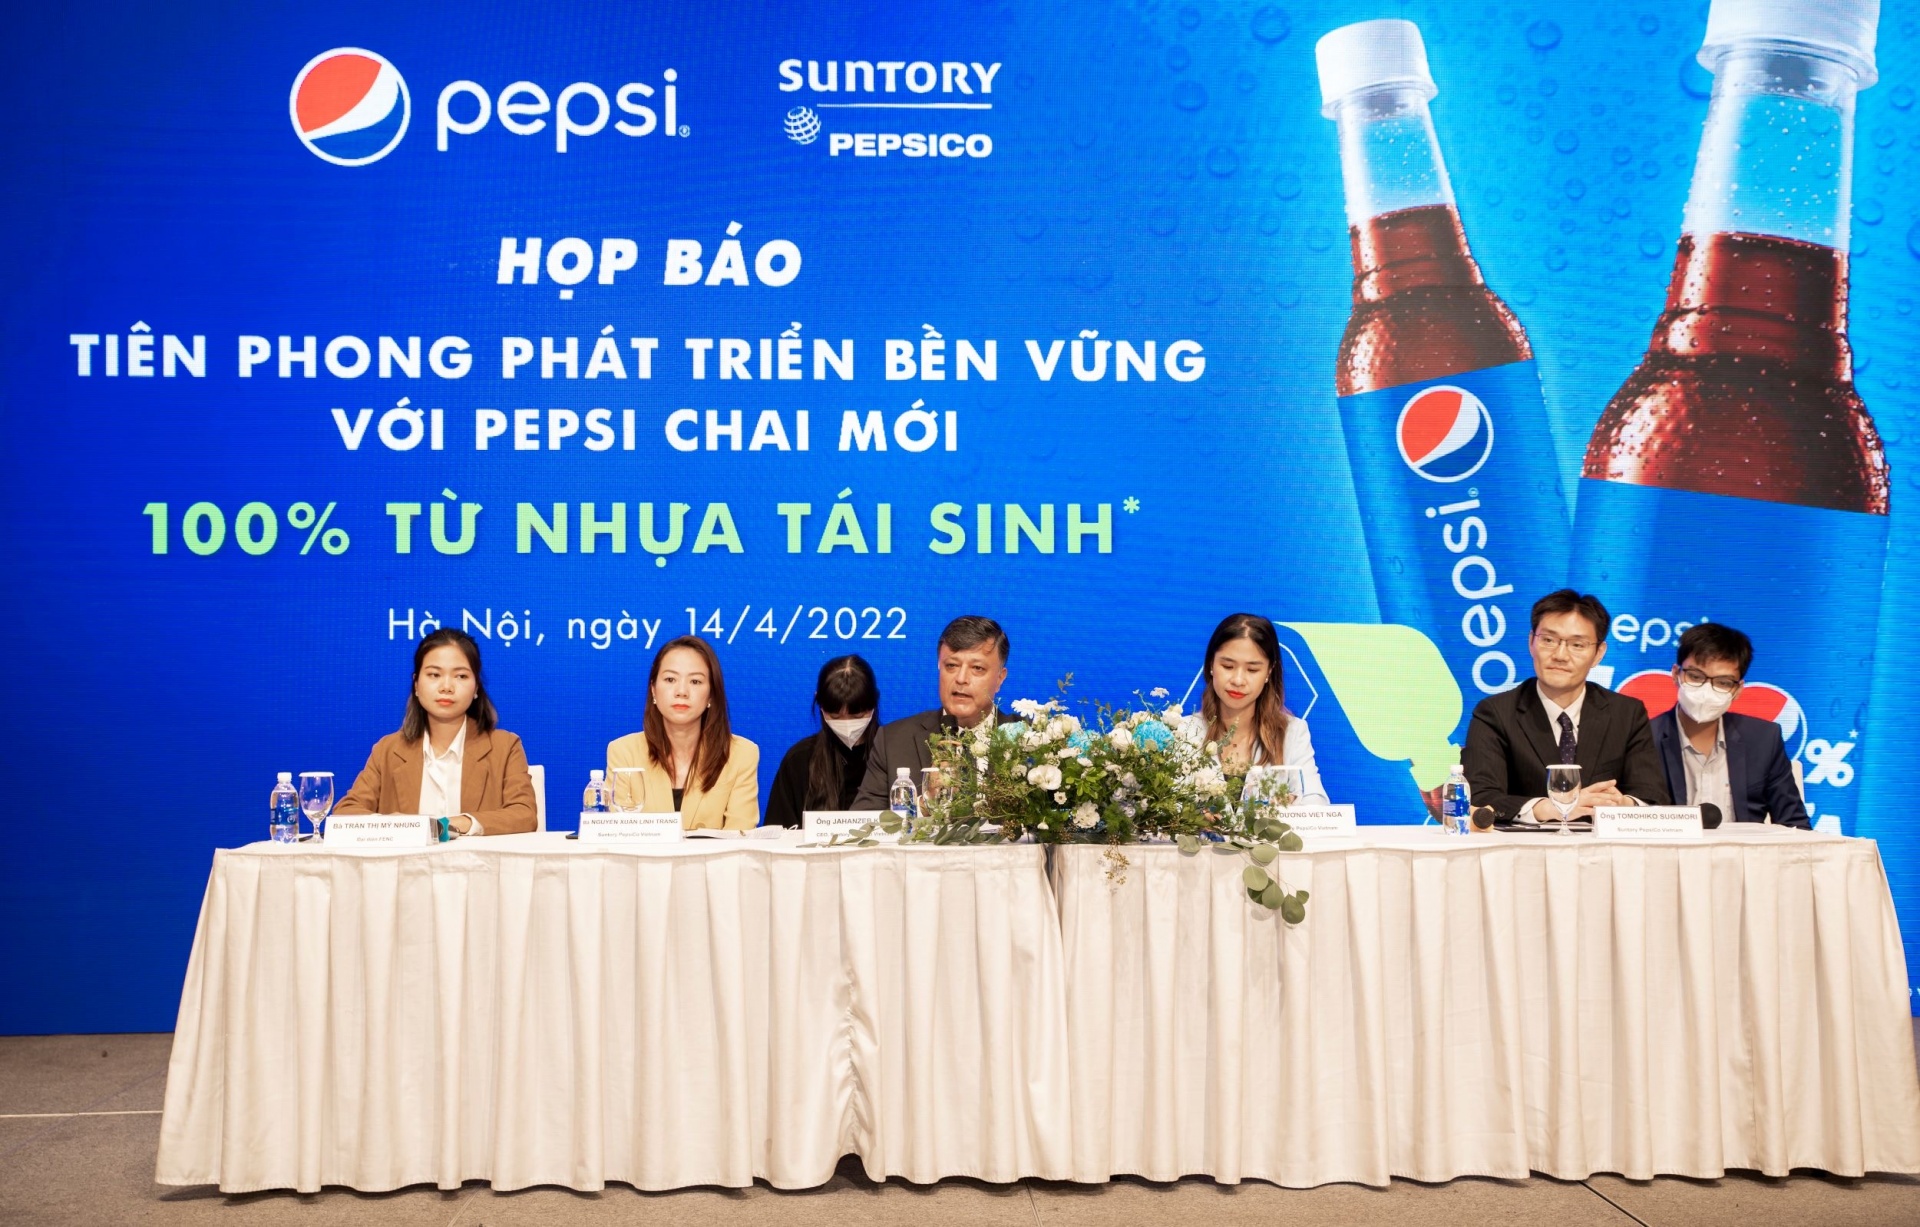 Suntory PepsiCo launched Pepsi product with packaging made from 100% recycled plastic in Vietnam market